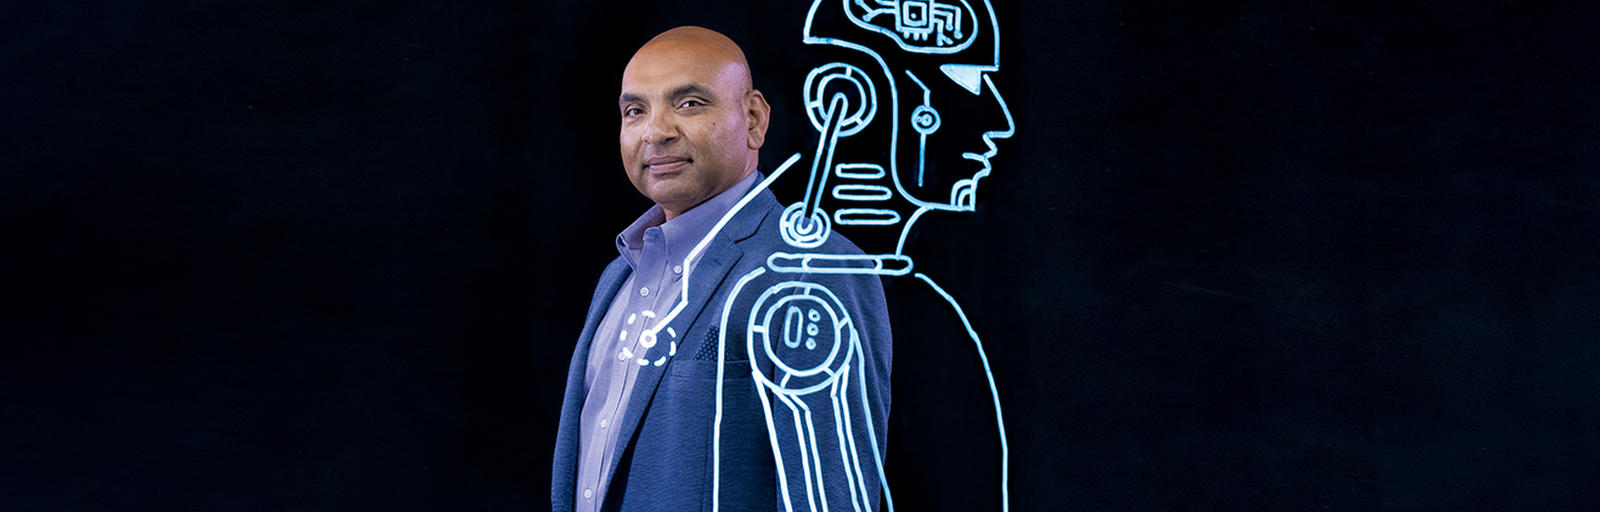 Professor Alok Gupta on black screen with a human body drawing overlaid on left shoulder.